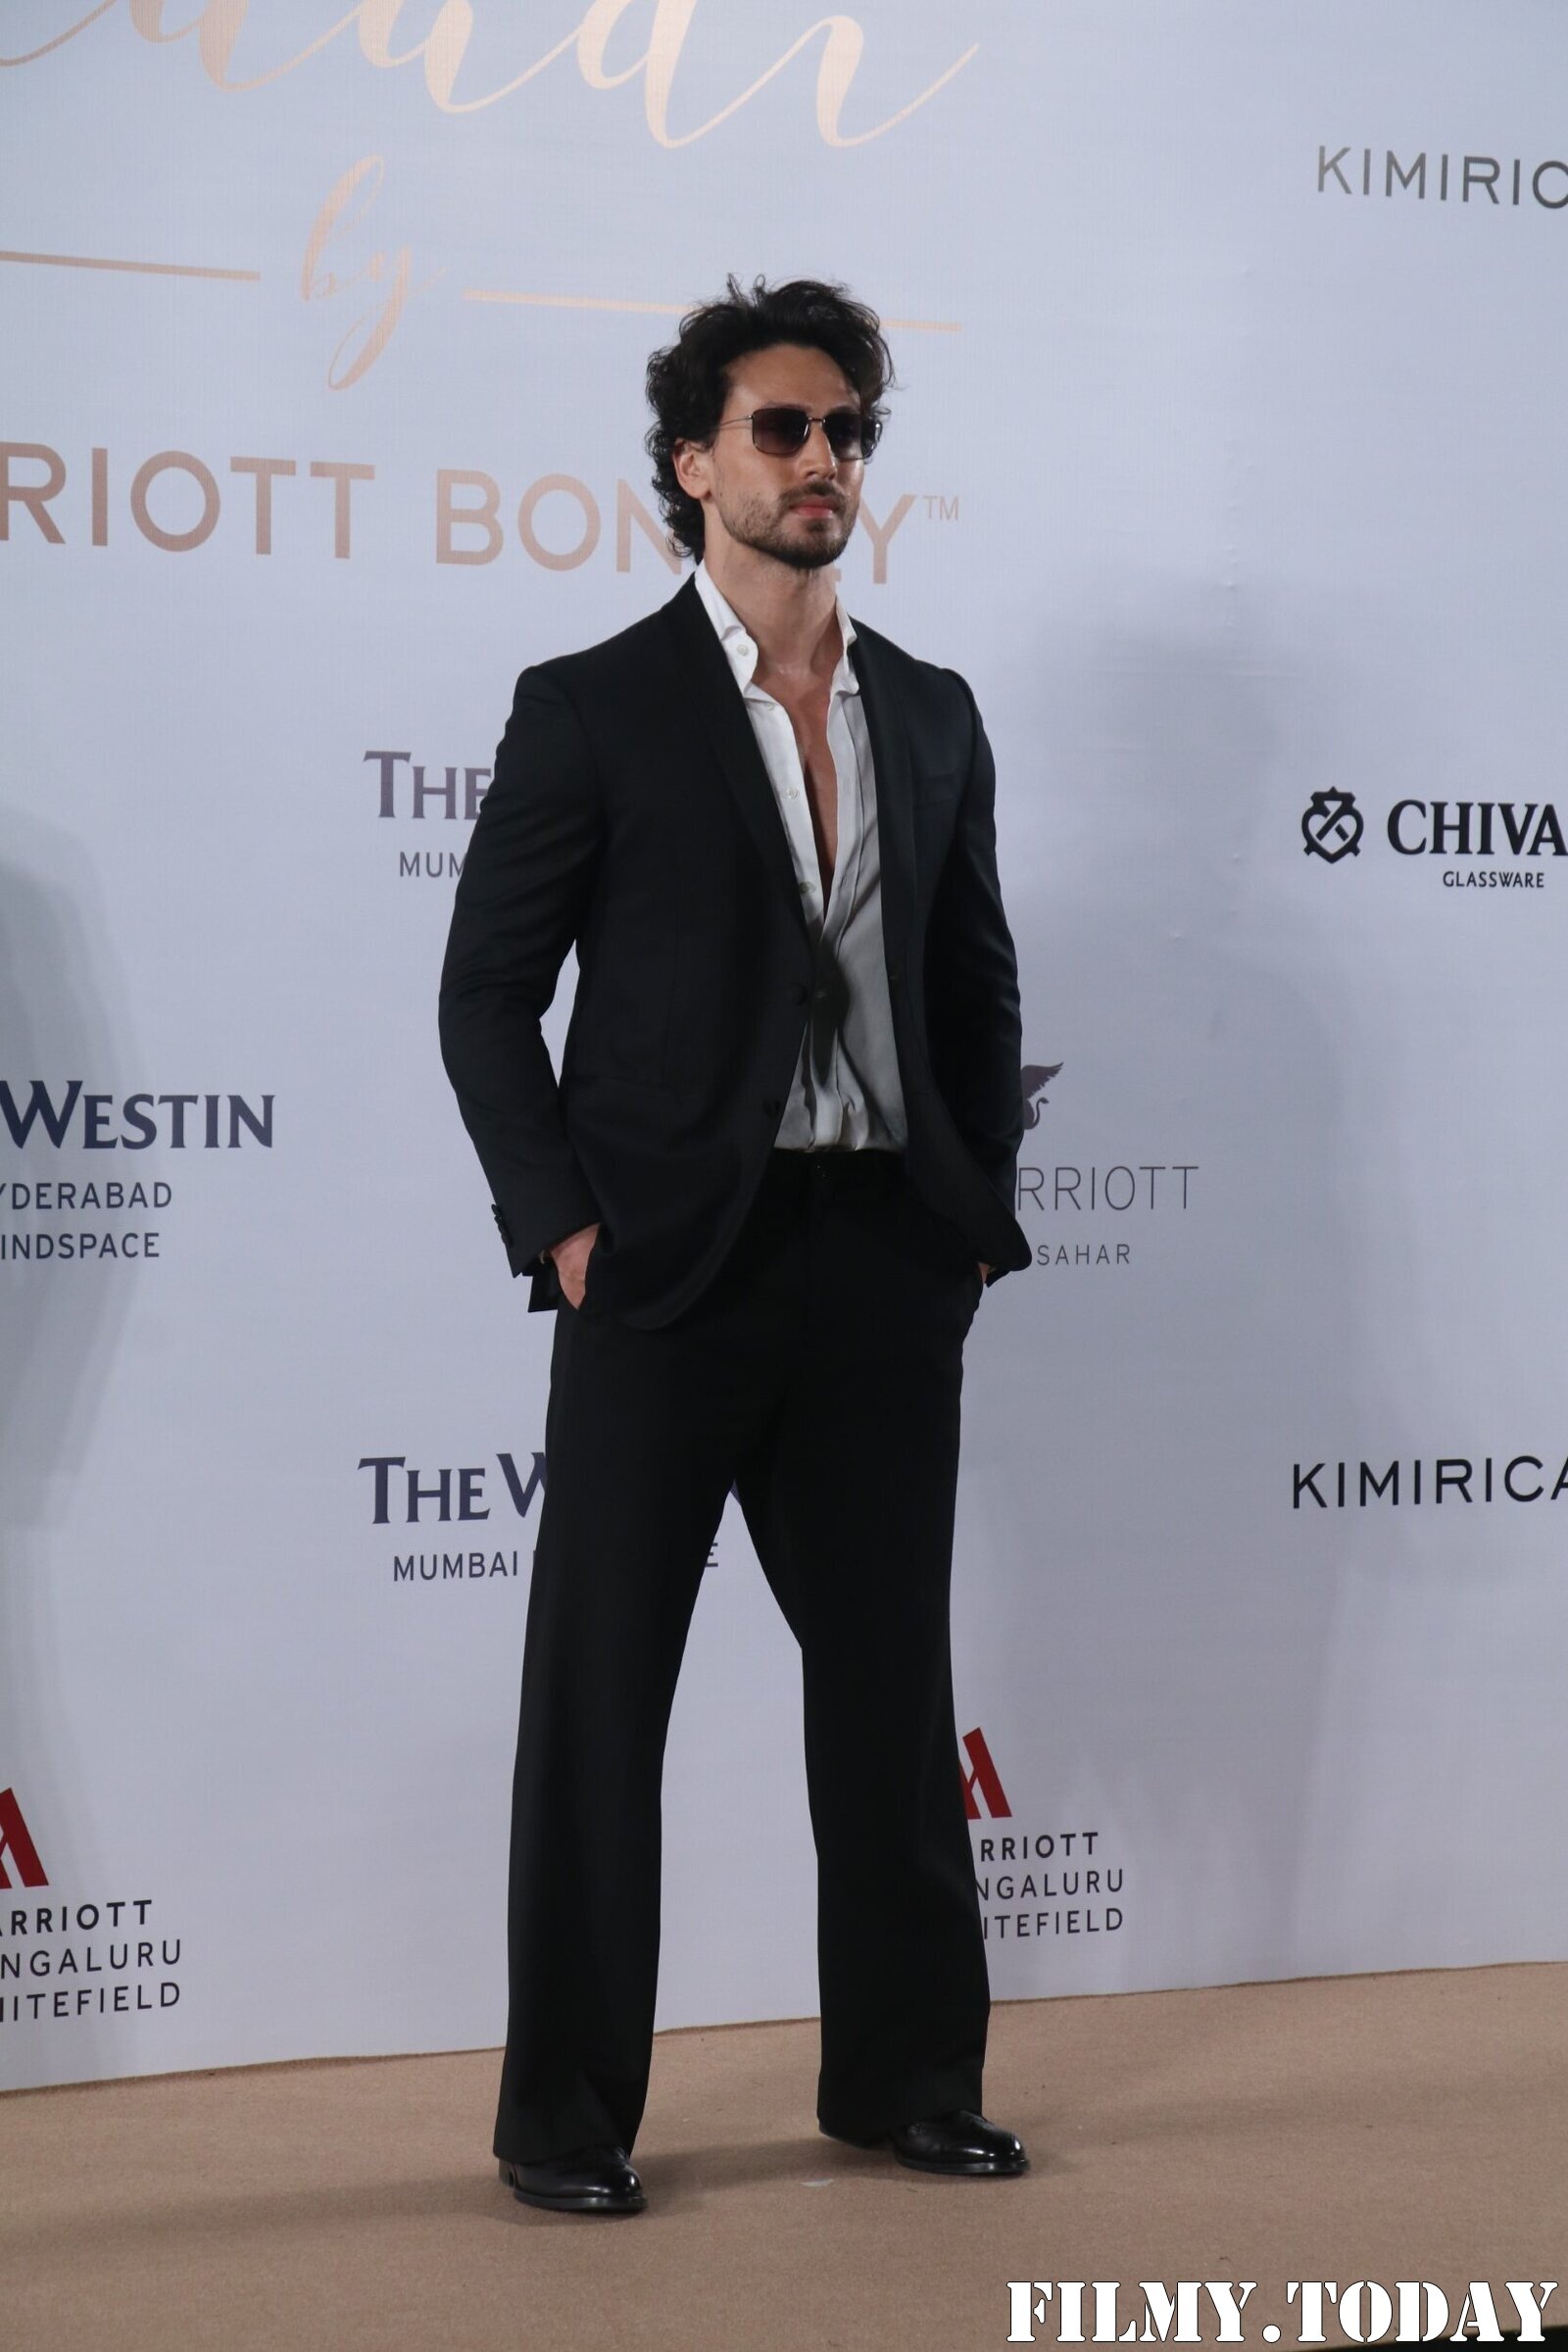 Tiger Shroff - Photos: Celebs At The Shaadi By Marriott Bonvoy Event | Picture 1922364